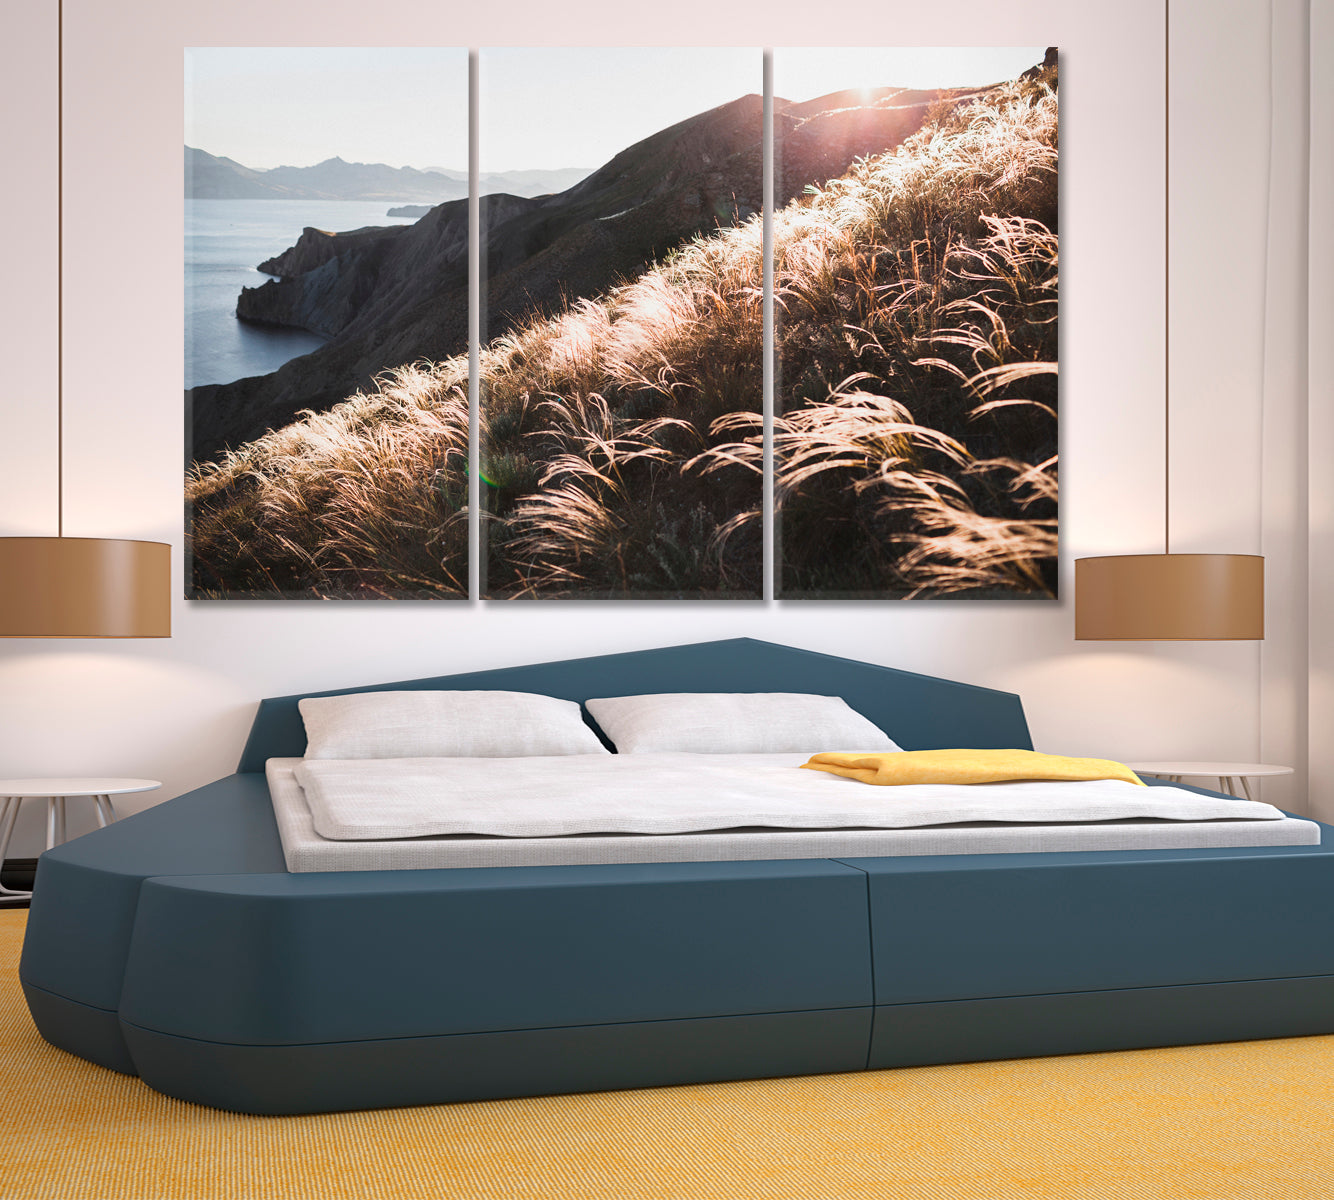 Sunset Coastline Landscape Hill Incredible Spring Field Feather Grass Nature Wall Canvas Print Artesty 3 panels 36" x 24" 